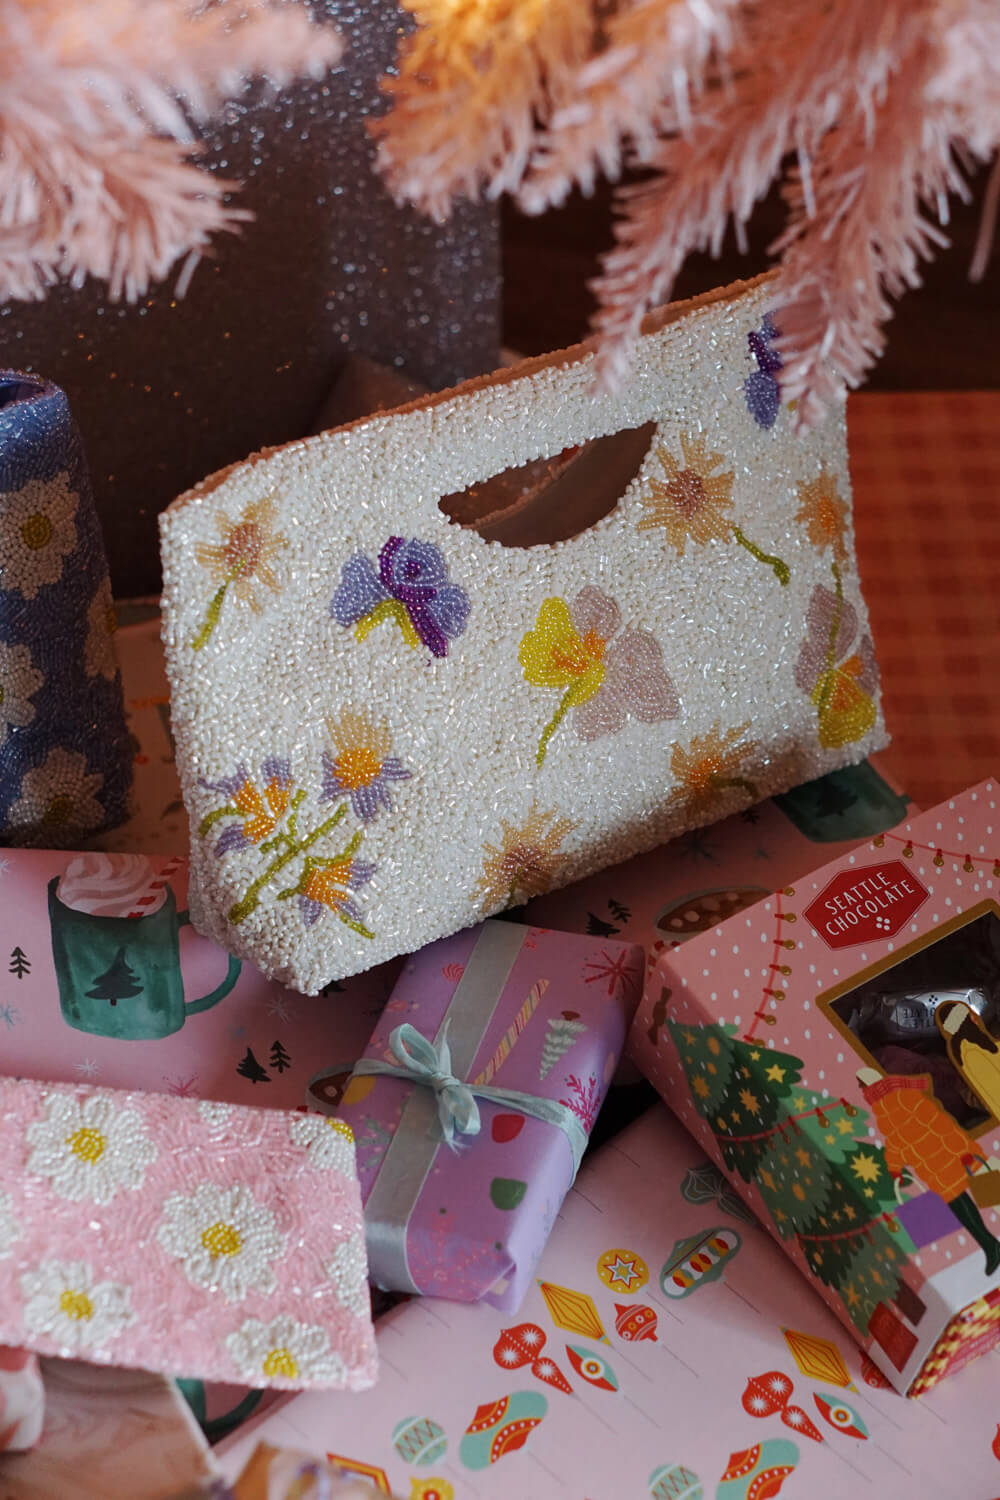 floral beaded clutch on top of pretty wrapping paper - handmade gift ideas from wallflower